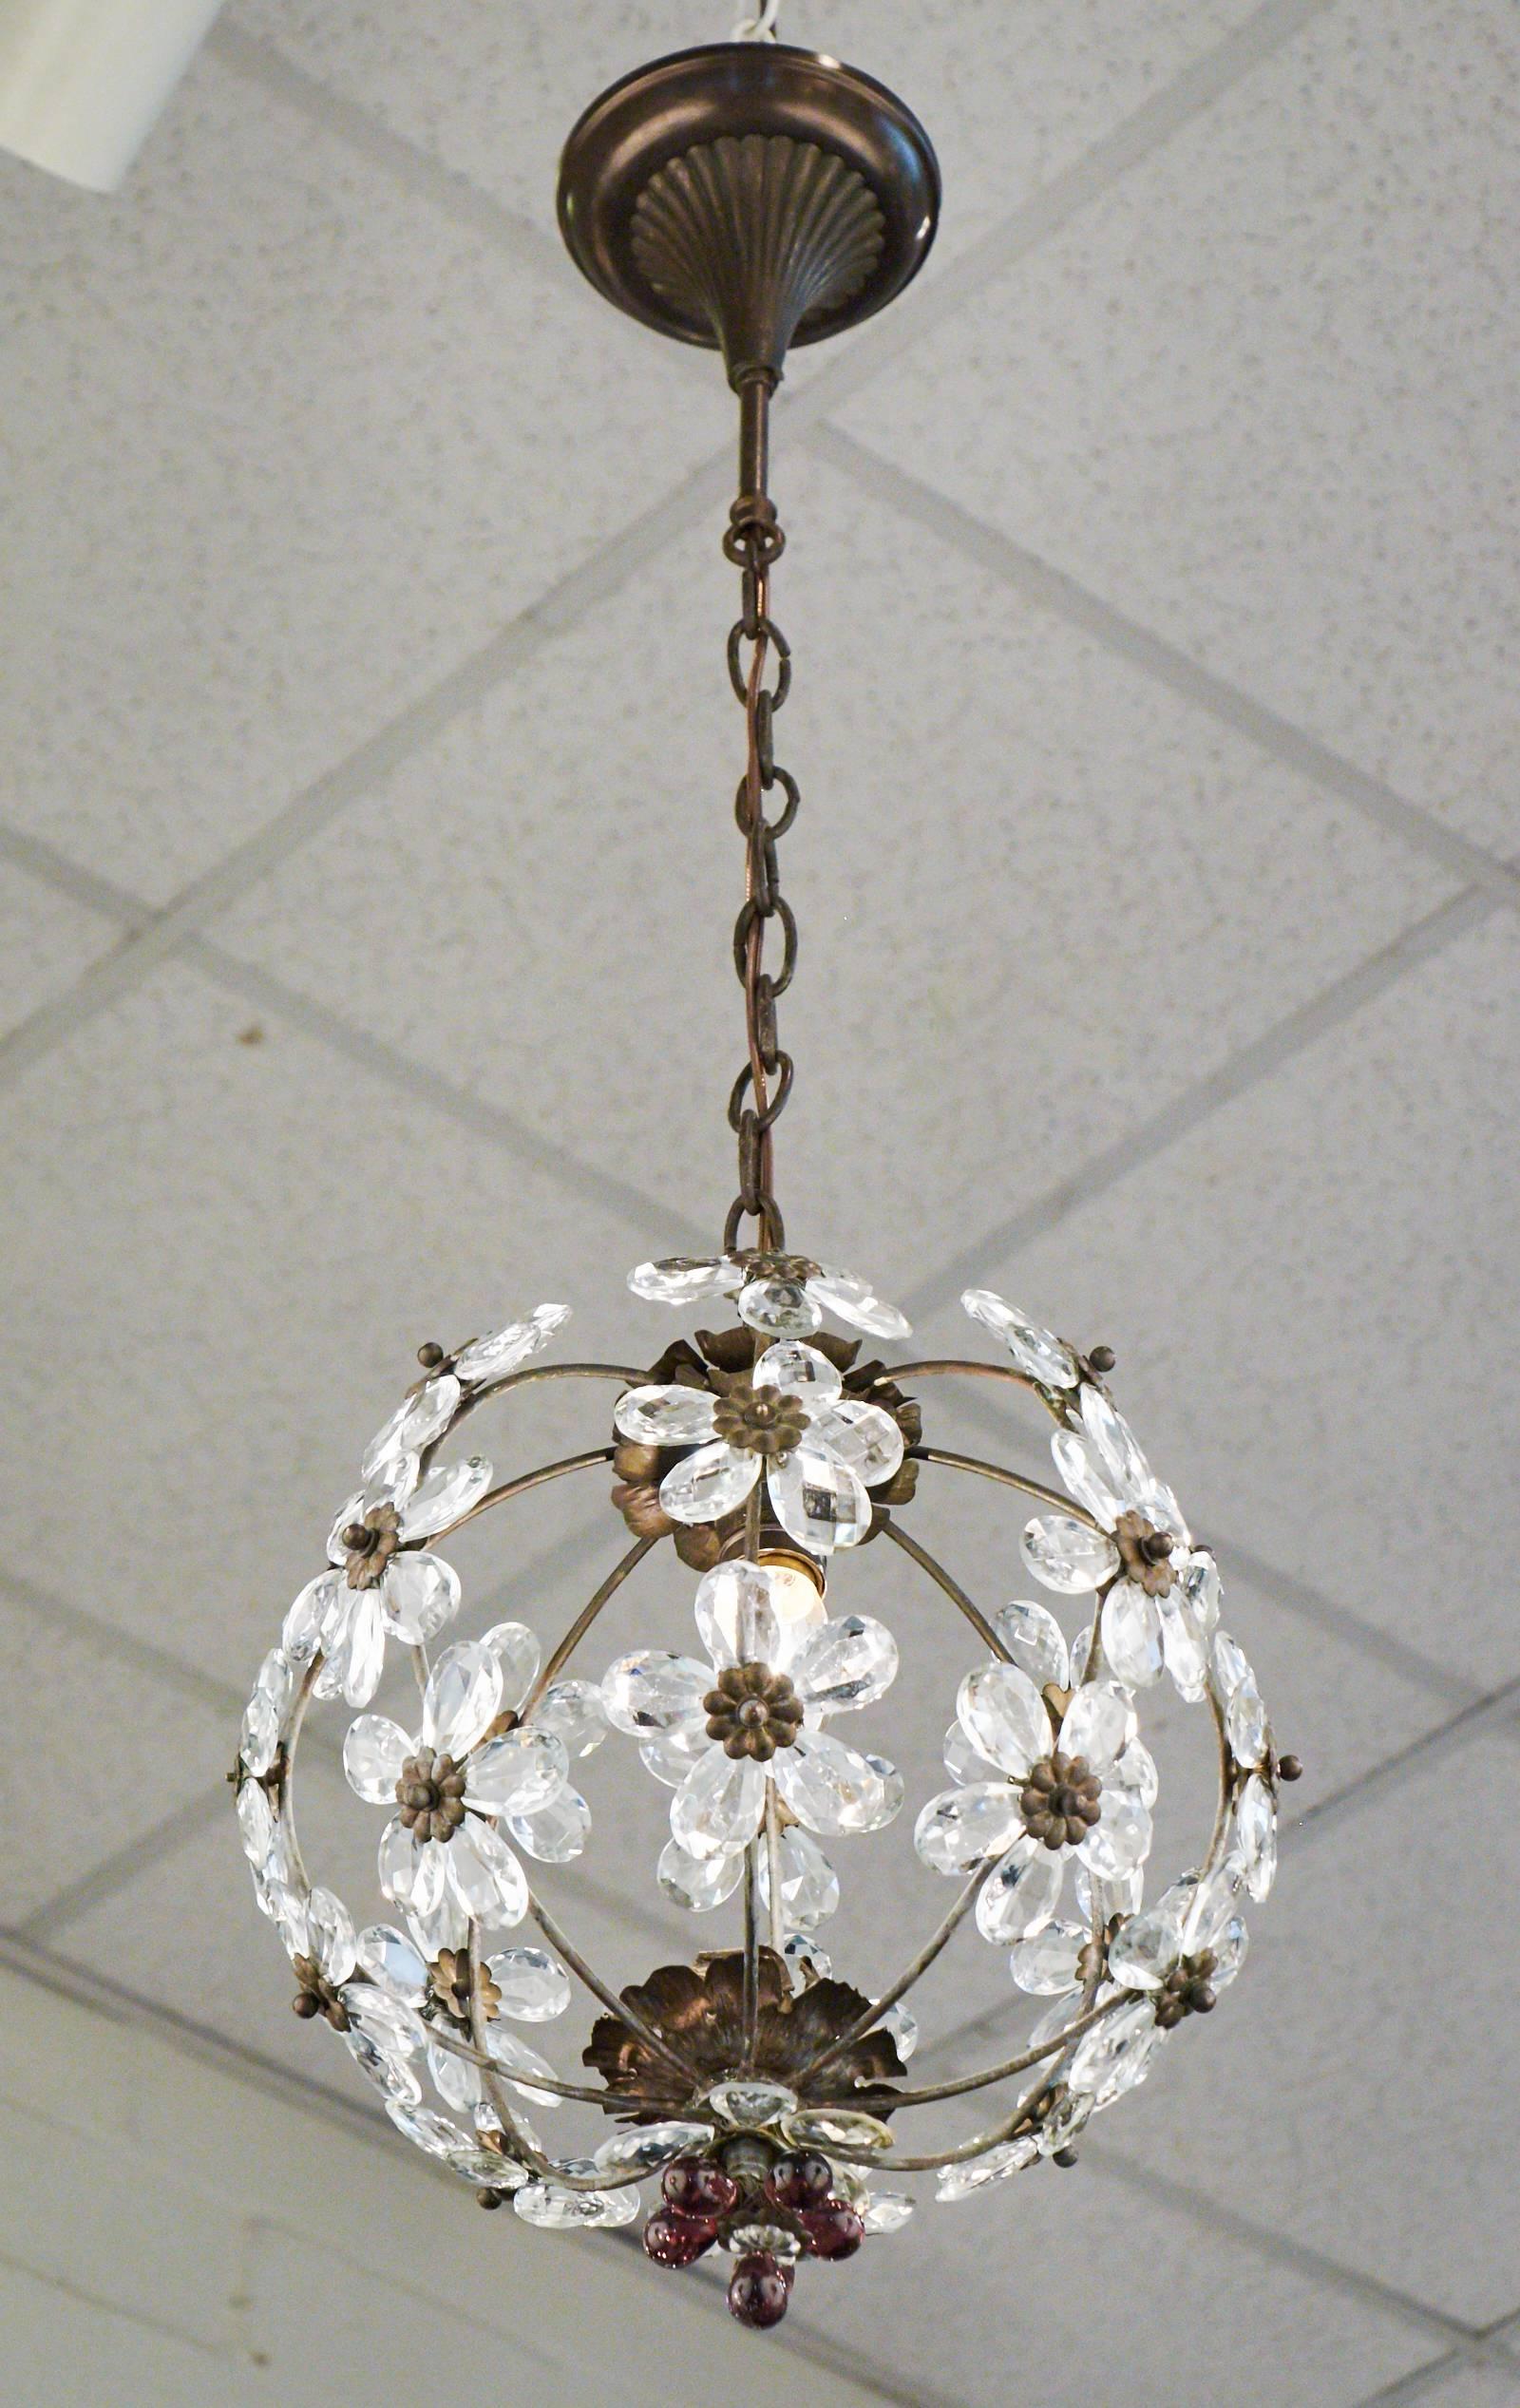 French antique round brass chandelier with crystal flowers. Great attention to detail, with brass flowers on the interiors and amethyst glass petals accentuating the bottom finial flower. Holds one medium base bulb, rewired for the US. Height with